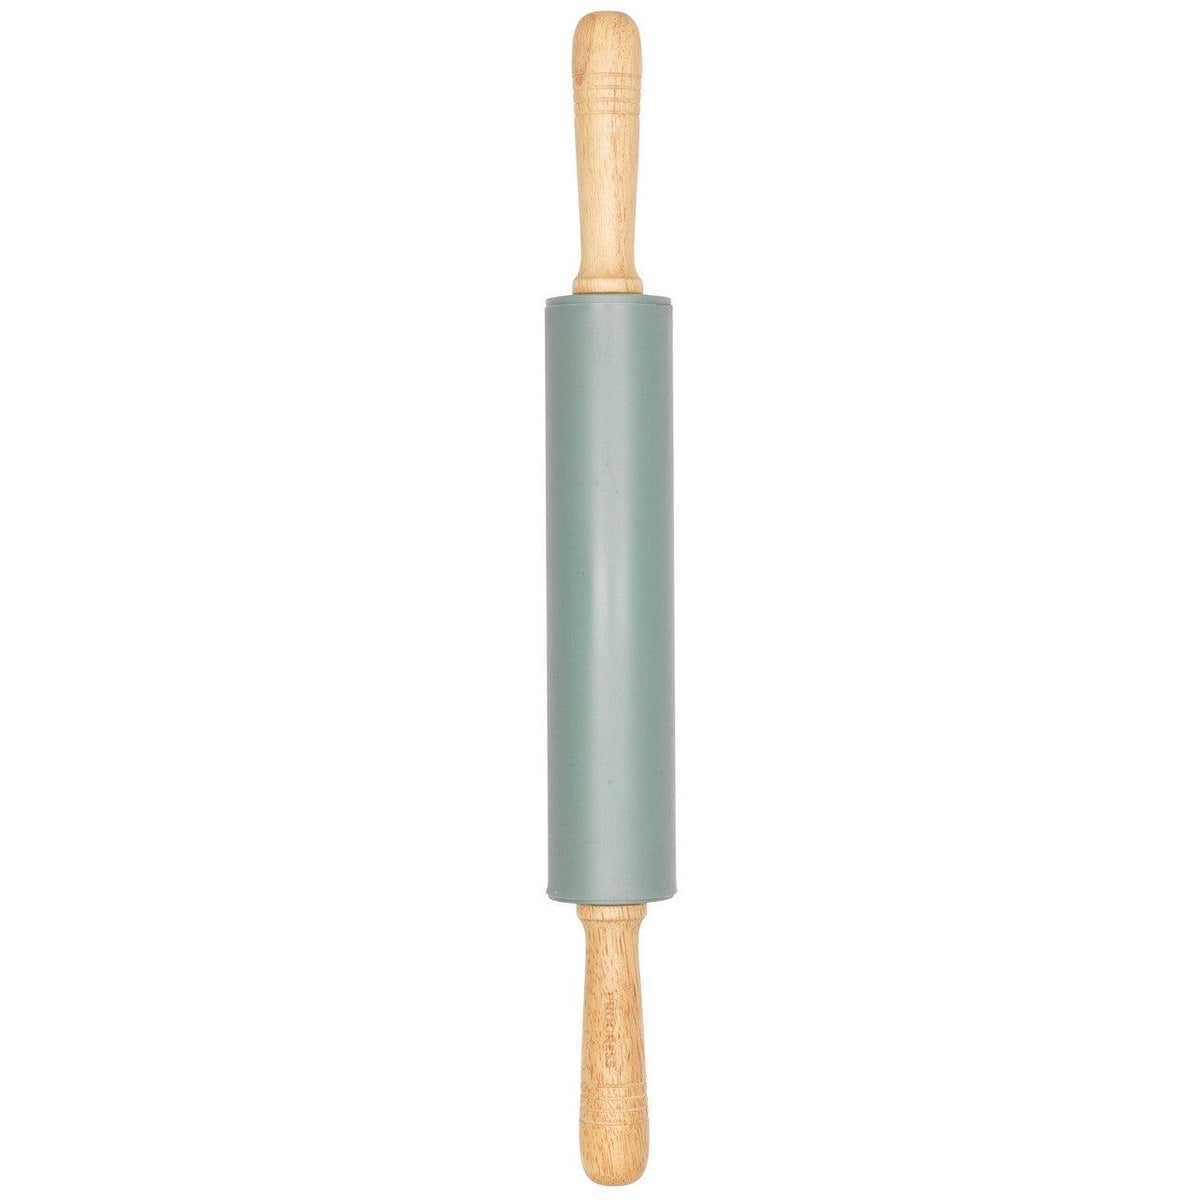 Progress Go Bake Rolling Pin with Wooden Handles | 24cm